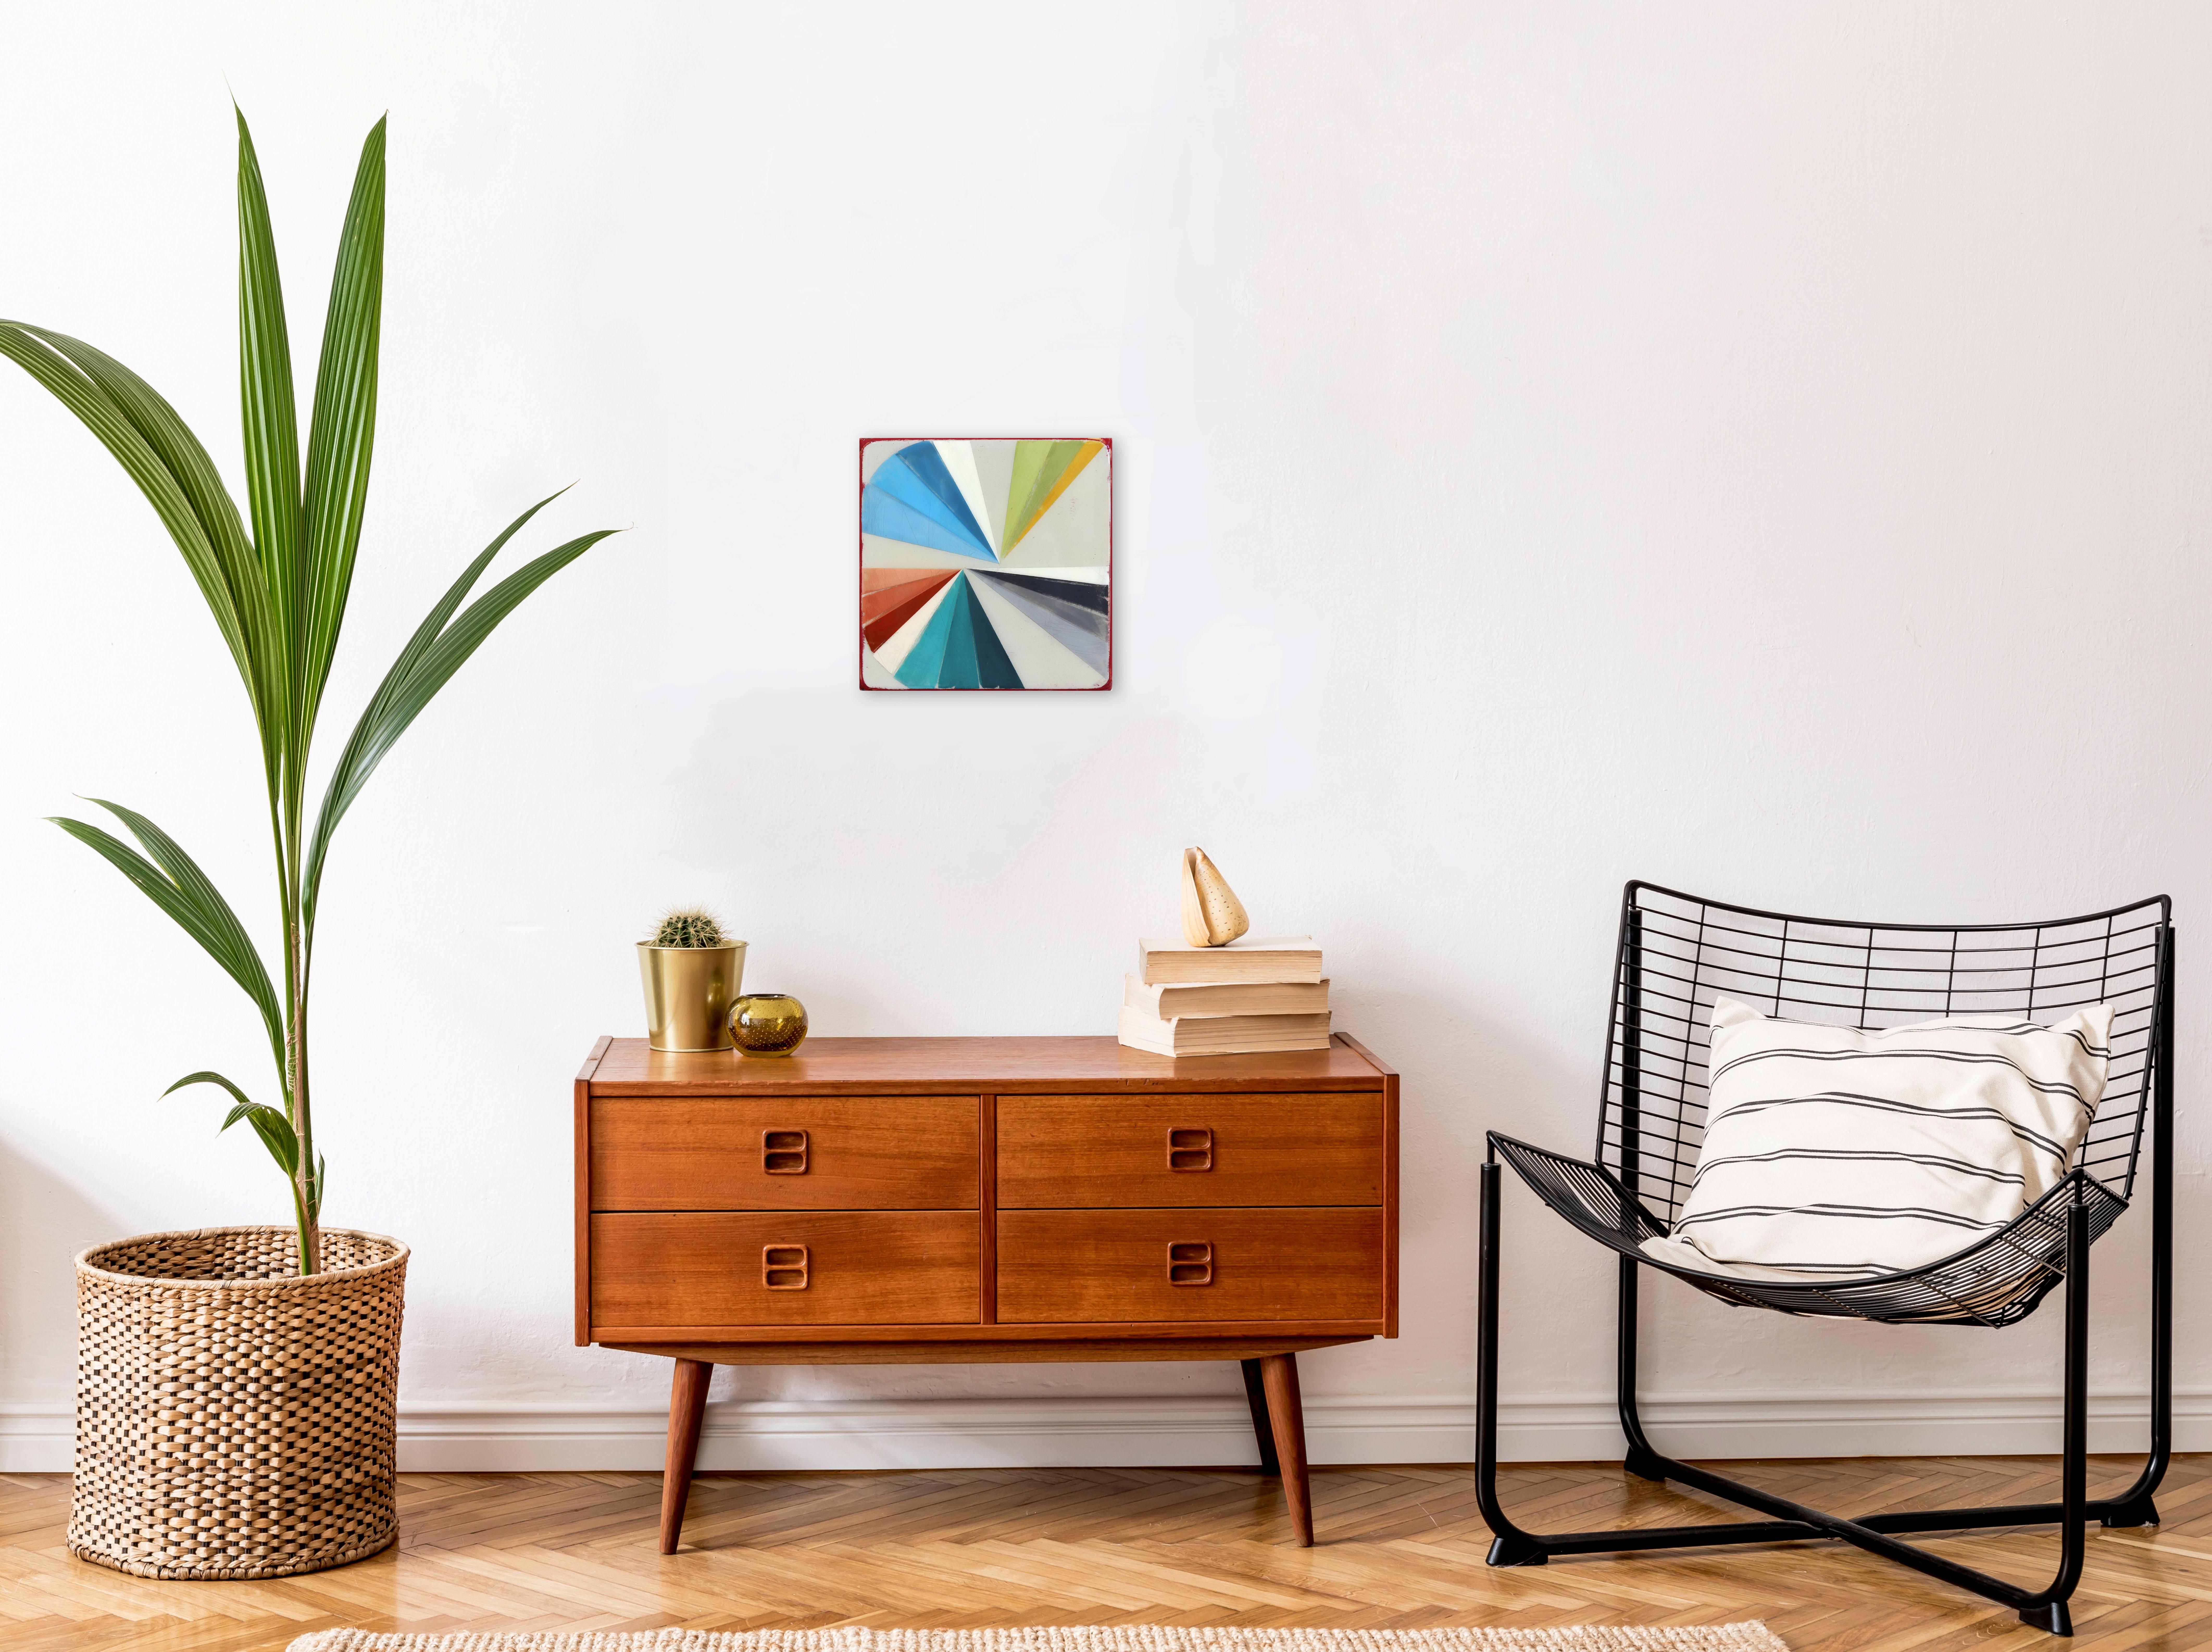 Wiggle Room 3 - Colorful Acrylic Minimalist Modern Resin Artwork - Painting by Ricky Hunt